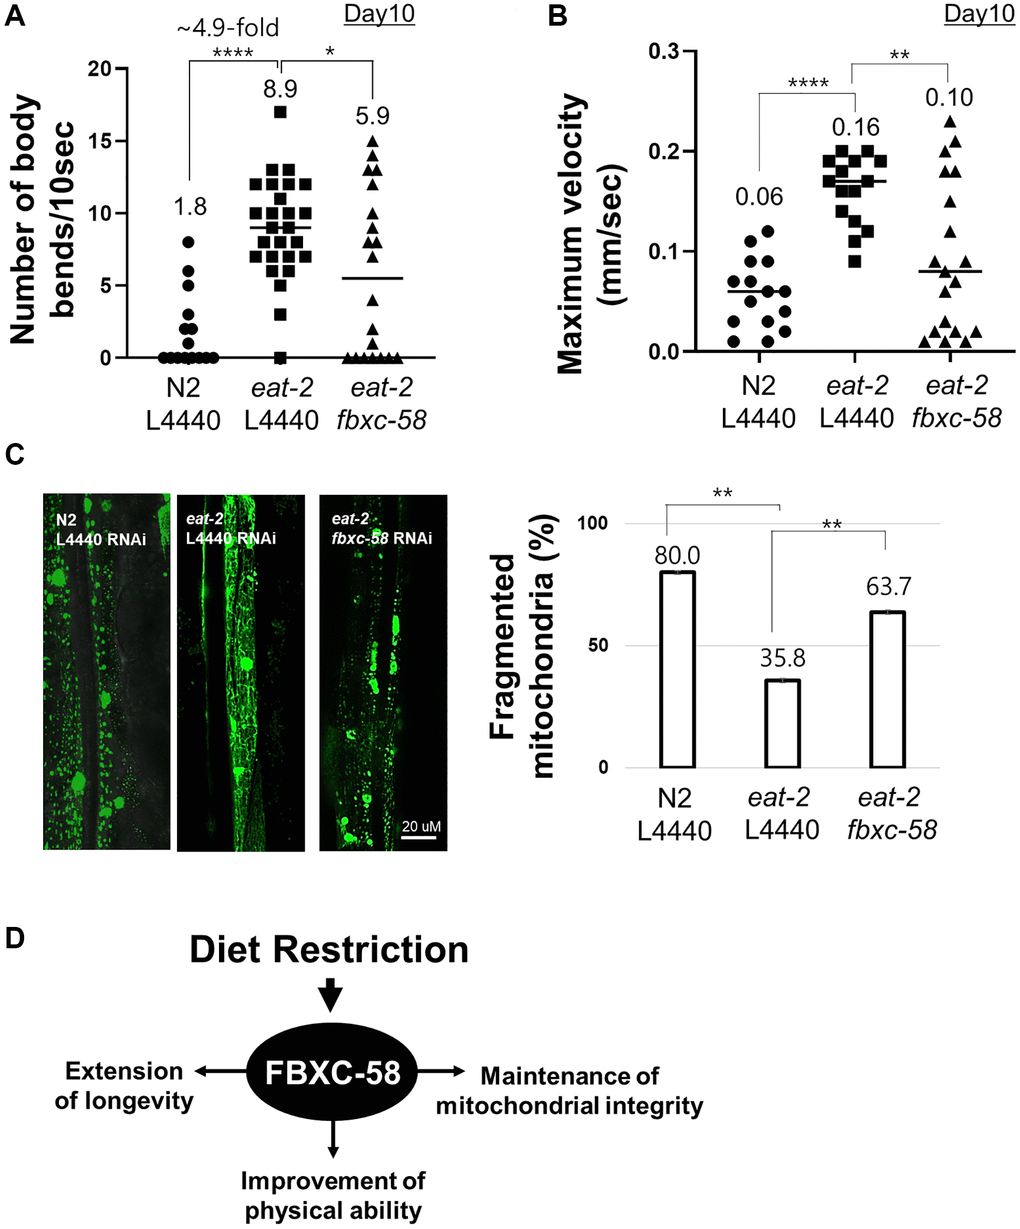 fbxc-58 mediates dietary restriction effects on mitigating muscle aging. (A) The number of body bends in N2 L4440 RNAi (N2 L4440) (n = 15), eat-2 L4440 RNAi (eat-2 L4440) (n = 26), and eat-2 fbxc-58 RNAi (eat-2 fbxc-58) (n = 20) at day 10 of adulthood. (B) MVs of N2 L4440 RNAi (N2 L4440) (n = 15), eat-2 L4440 RNAi (eat-2 L4440) (n = 15), and eat-2 fbxc-58 RNAi (eat-2 fbxc-58) (n = 19) at day 10 of adulthood. (C) The morphological categories of mitochondria are defined as follows. Images showing most of the long interconnected mitochondrial networks were classified as tubular, and images showing most of the short mitochondria or sparse globular mitochondria were classified as fragmented. Mitochondrial morphology was examined in PD4251 and eat-2(ad1116); PD4251 strain that emits fluorescence from mitochondria due to GFP expressed in mitochondria. (Left) Representative images of N2 L4440 RNAi (N2 L4440), eat-2 L4440 RNAi and eat-2 fbxc-58 RNAi at day 8 of adulthood. (Right) Qualitative analysis of mitochondrial morphology in N2 L4440 RNAi (N2 L4440), eat-2 L4440 RNAi (eat-2 L4440) and eat-2 fbxc-58 RNAi (eat-2 fbxc-58) at day 8 of adulthood. Bars represent the proportion of worms with fragmented mitochondria. (D) A schematic diagram of fbxc-58 mediating DR-induced effects. Error bars represent SEM. *p **p ****p t test.